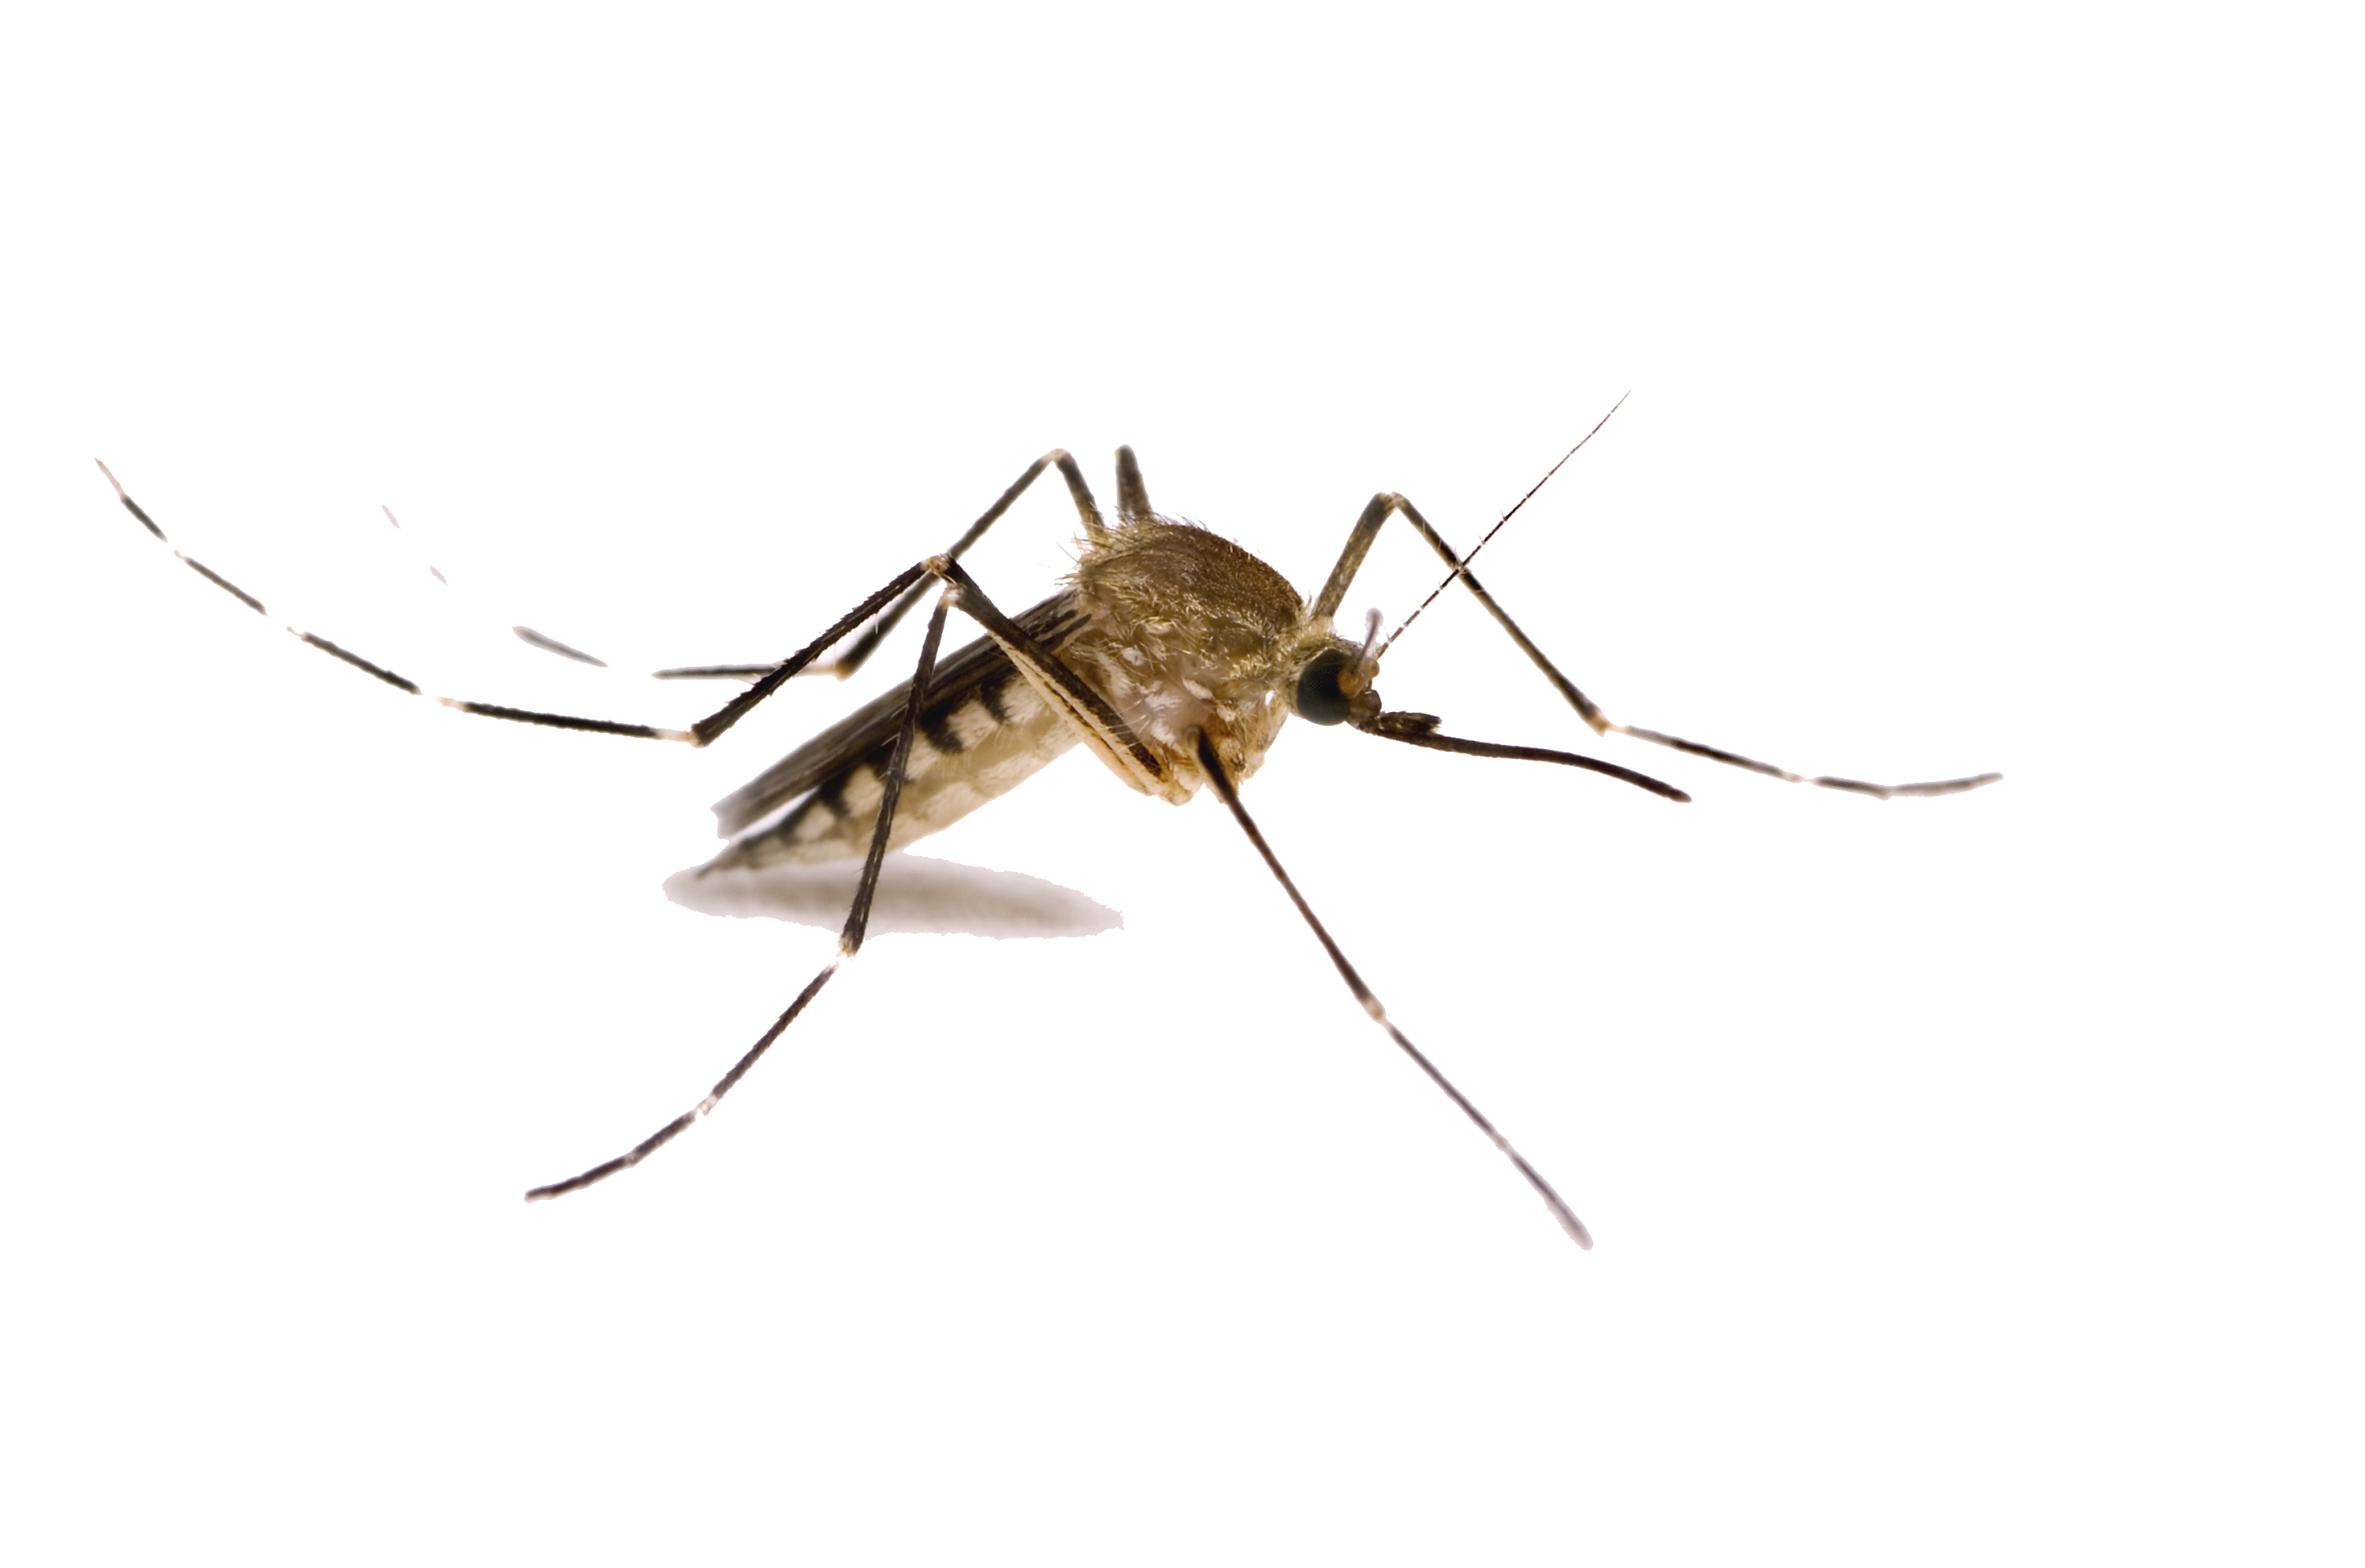 Png transparent images all. Sad clipart mosquito